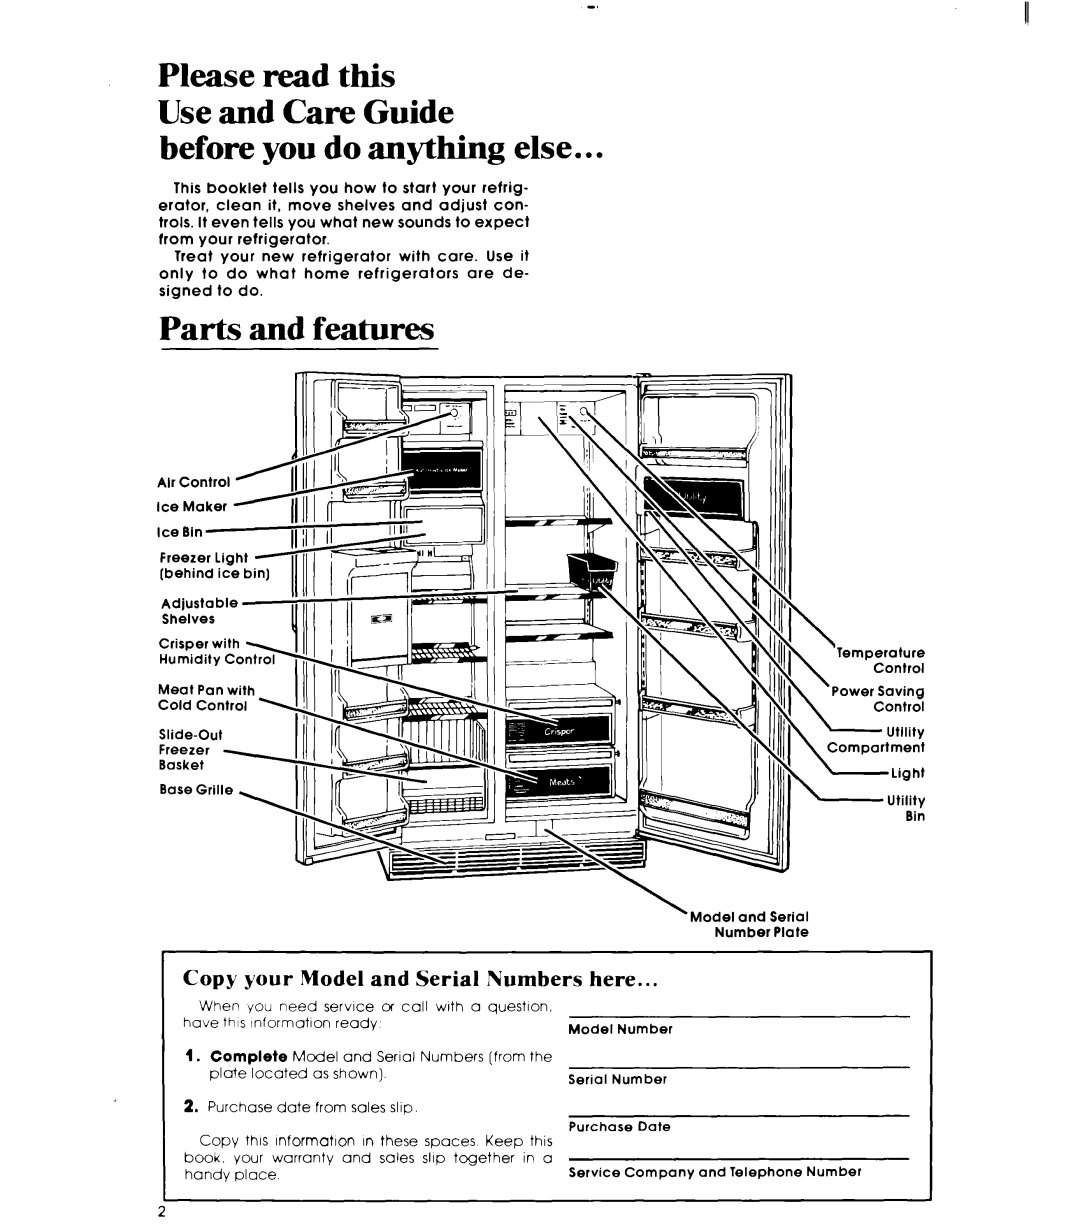 Whirlpool ED25SM manual before you do anything else, Parts and feature-s, Please read this Use and Care Guide 